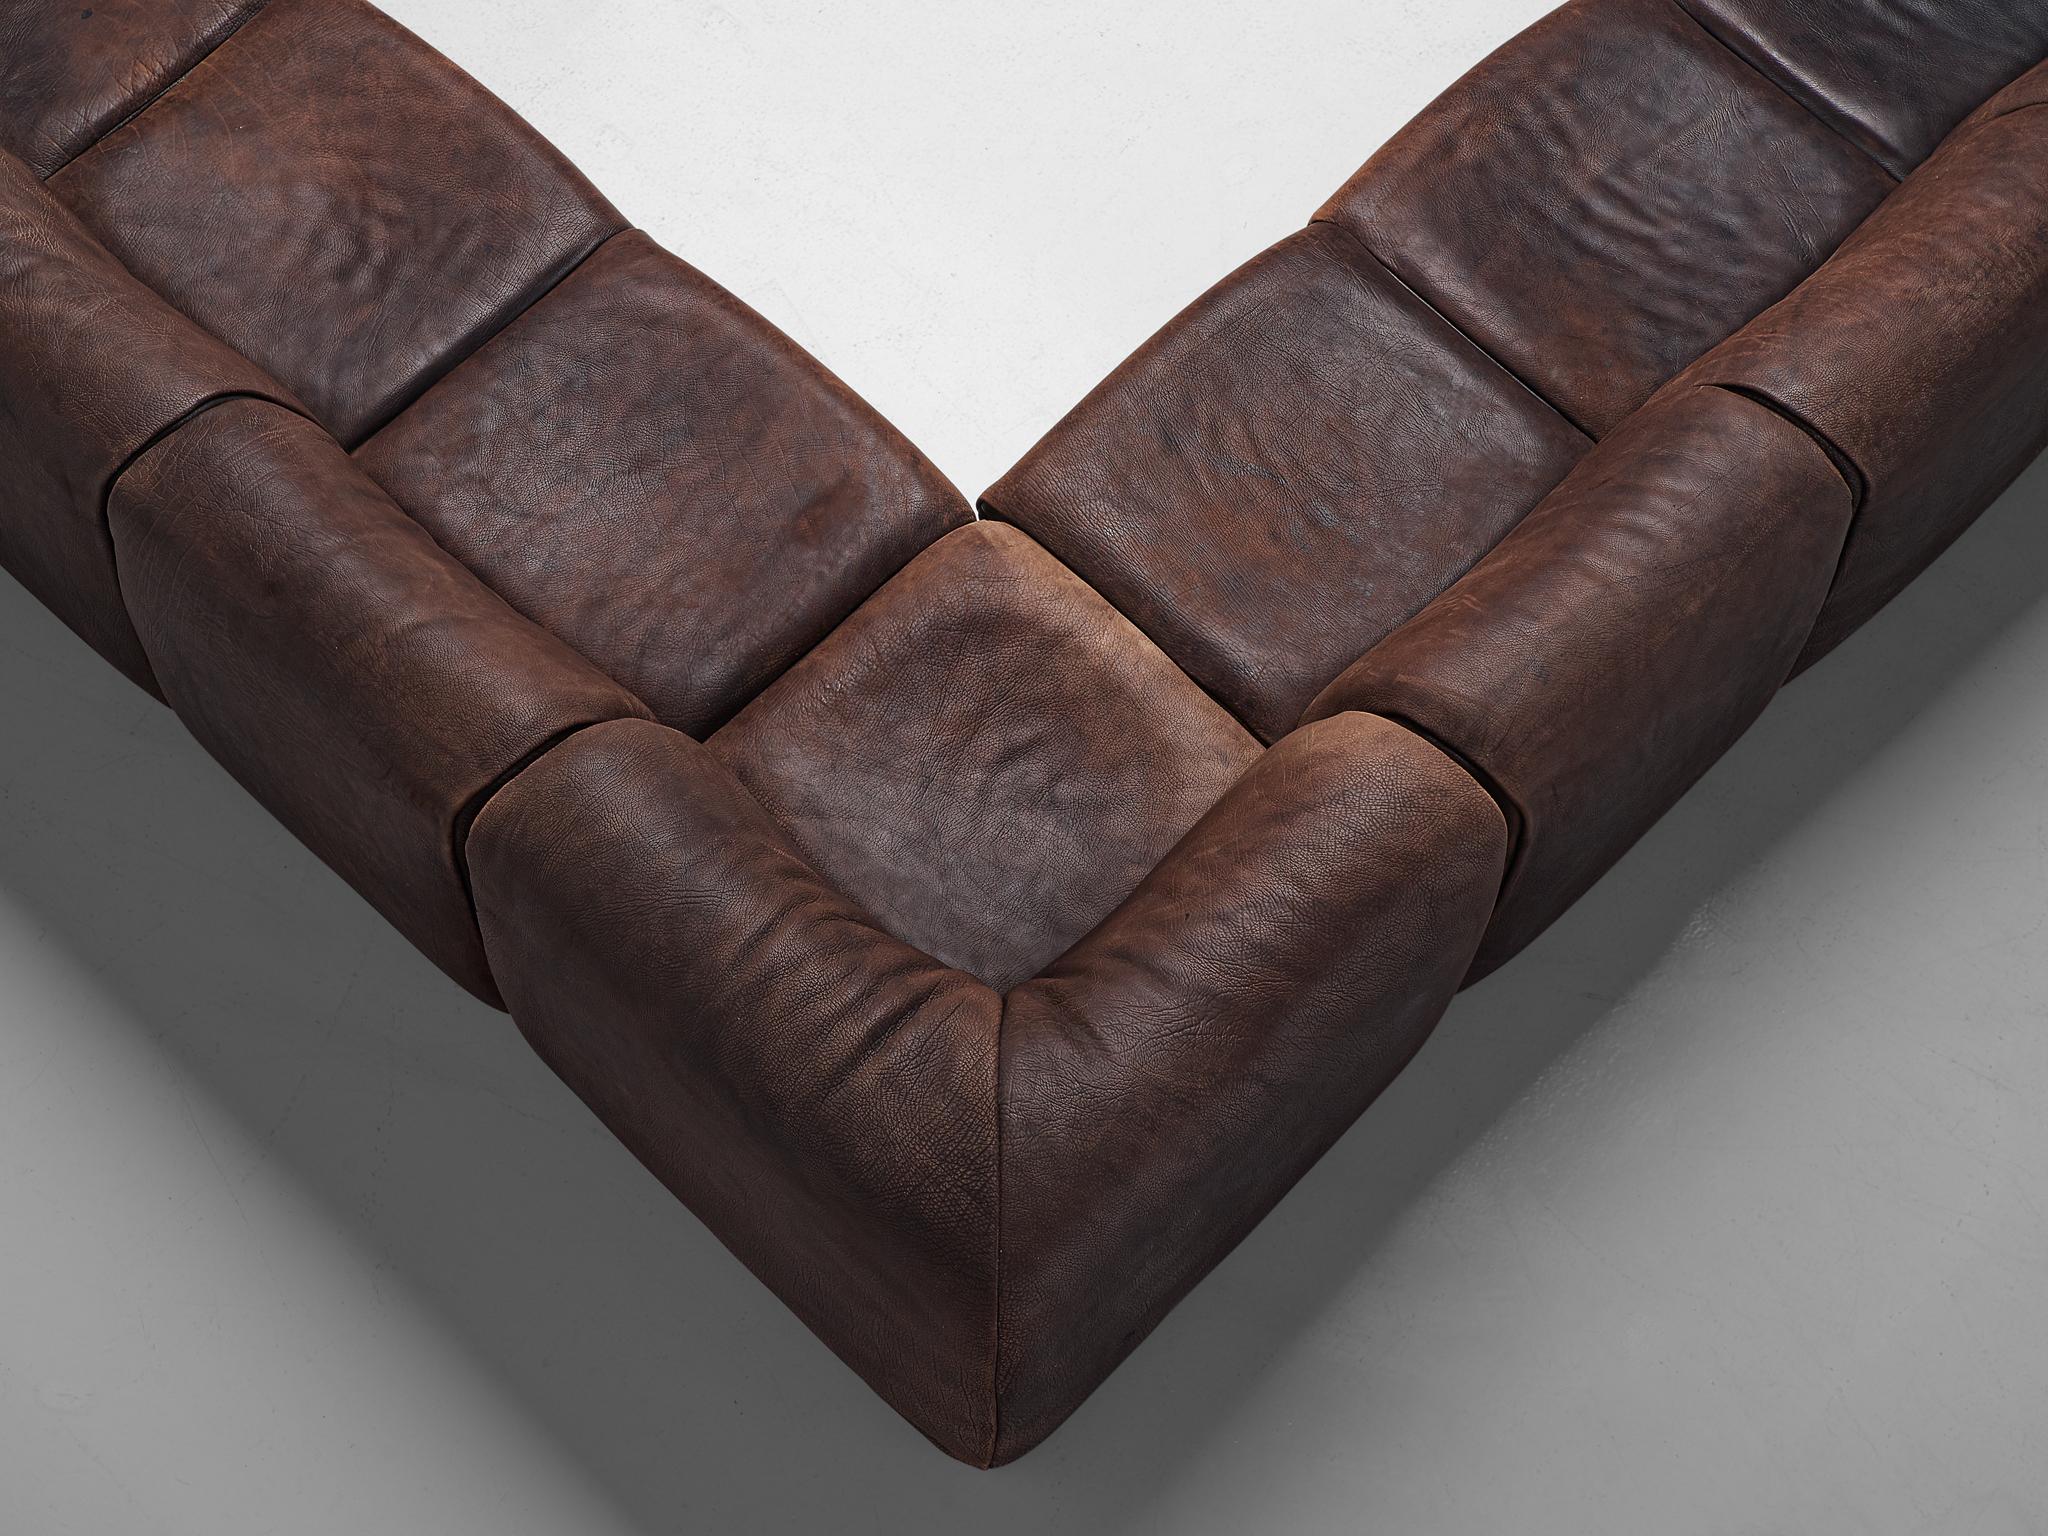 Late 20th Century De Sede Sectional Sofa in Dark Brown Buffalo Leather